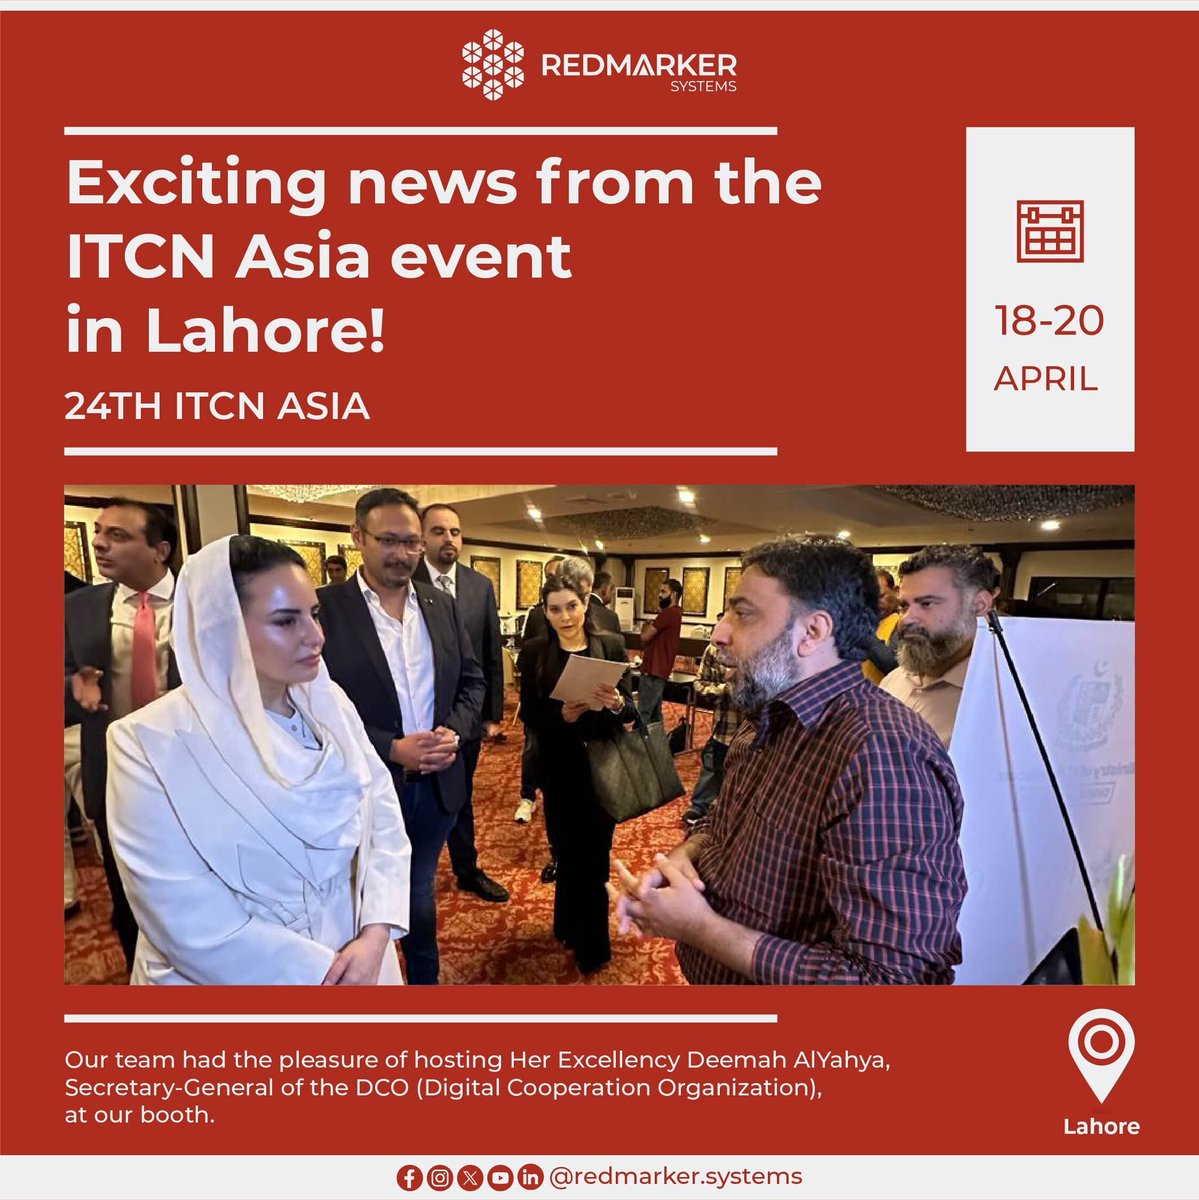 Exciting news from the ITCN Asia event in Lahore!

We had the honor of hosting Her Excellency Deemah AlYahya, Secretary-General of the Digital Cooperation Organization, at our booth.

#ITCNAsia #EdTech #Education #Technology #RedMarkerSystems